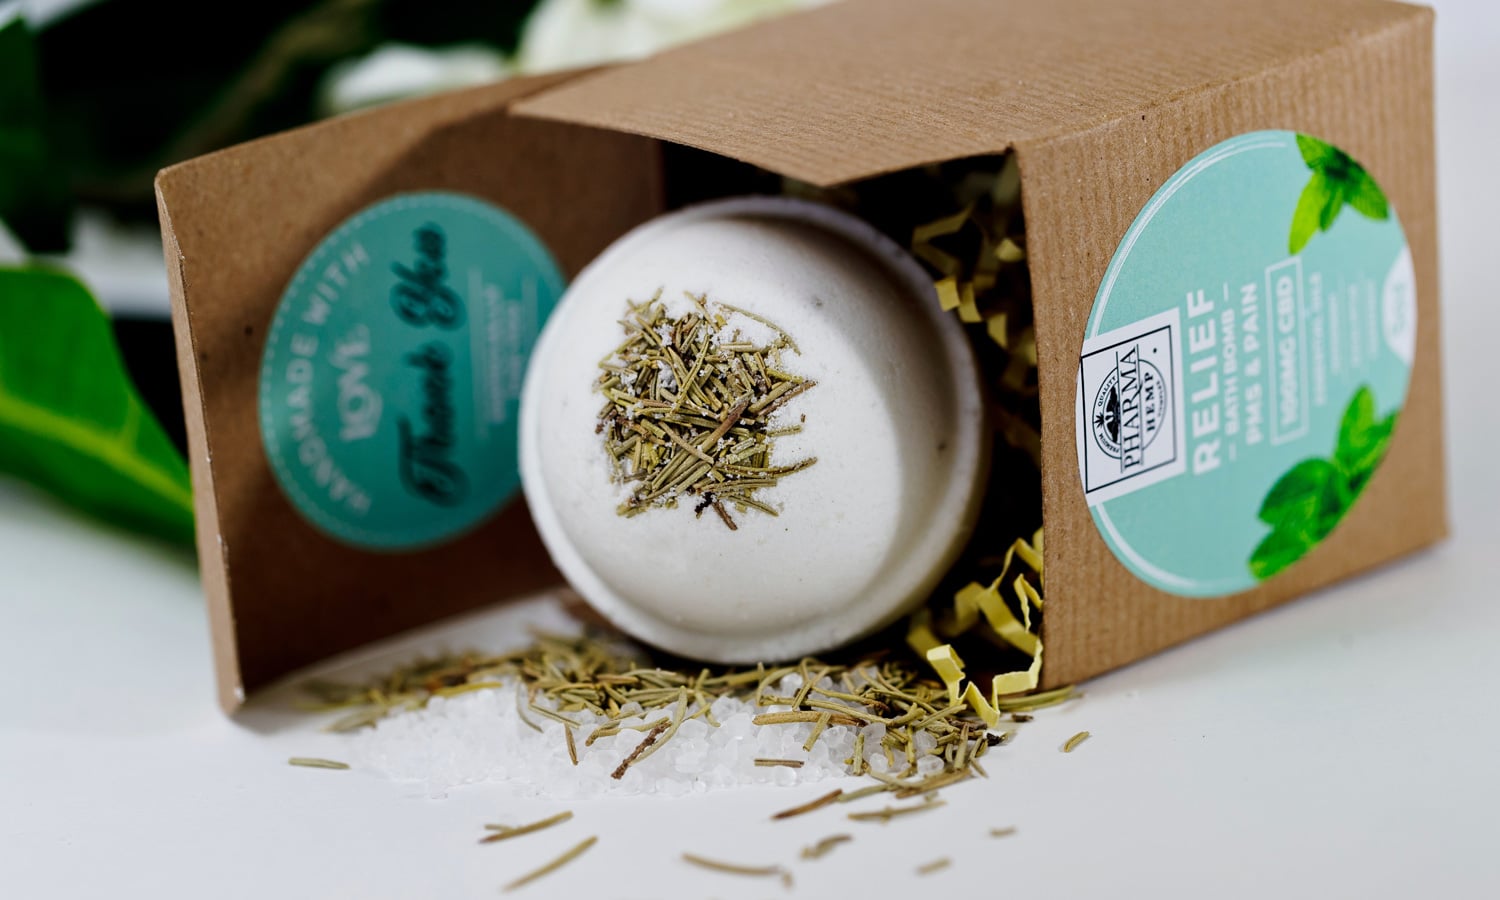 CBD Bath Bombs Sound Relaxing, But Do They Work?